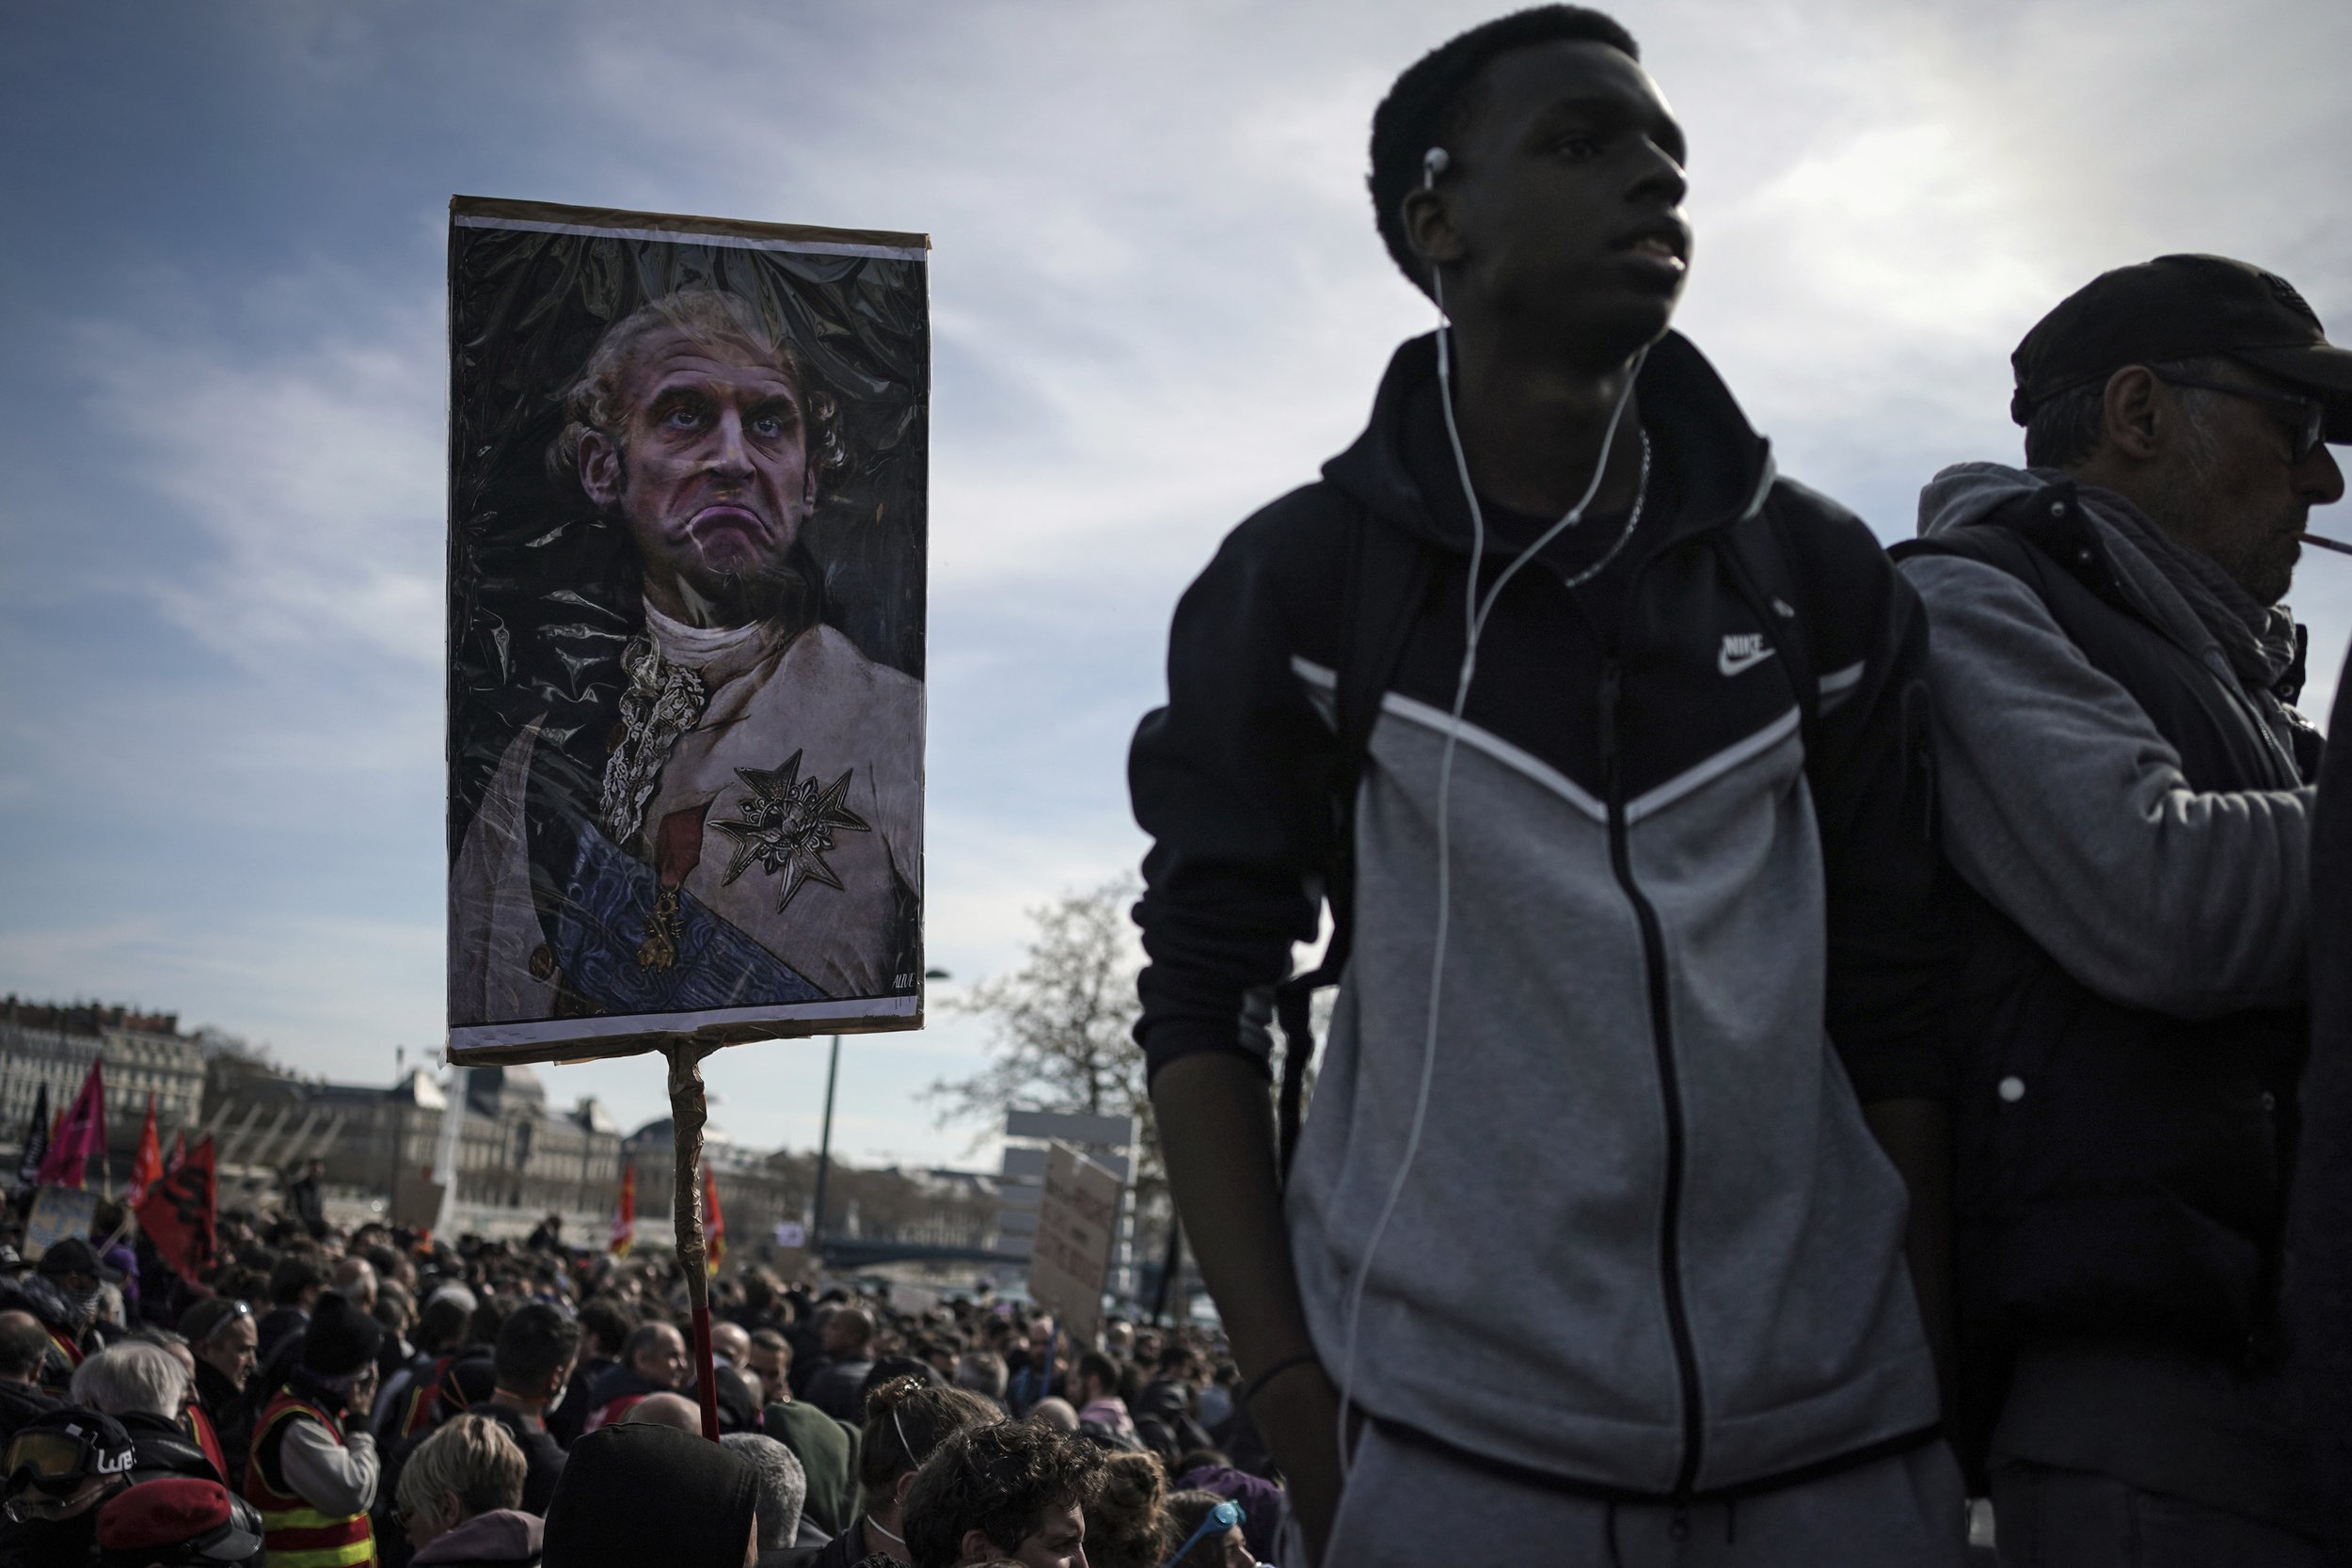  A protester holds a picture representing Emmanuel Macron dressed as a king during a demonstration against unpopular pension reforms and Macron's push to raise France's legal retirement age from 62 to 64, in Lyon, France, on March 28, 2023. (AP Photo